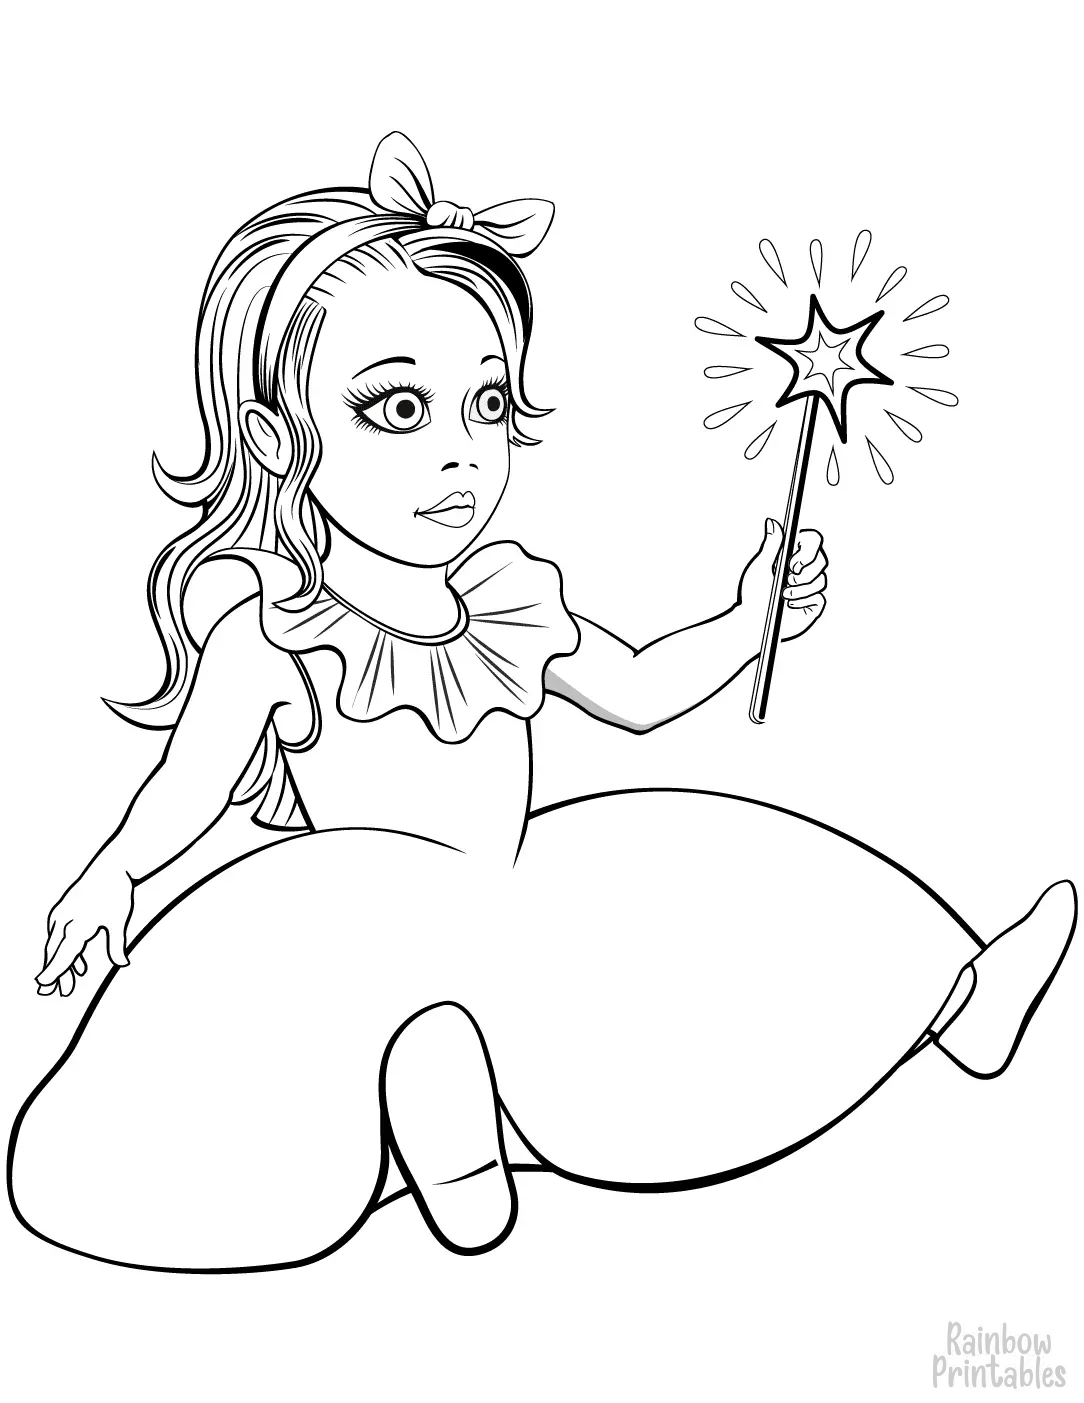 CUTE TOY DOLL MAGIC WAND Clipart Coloring Pages for Kids Adults Art Activities Line Art